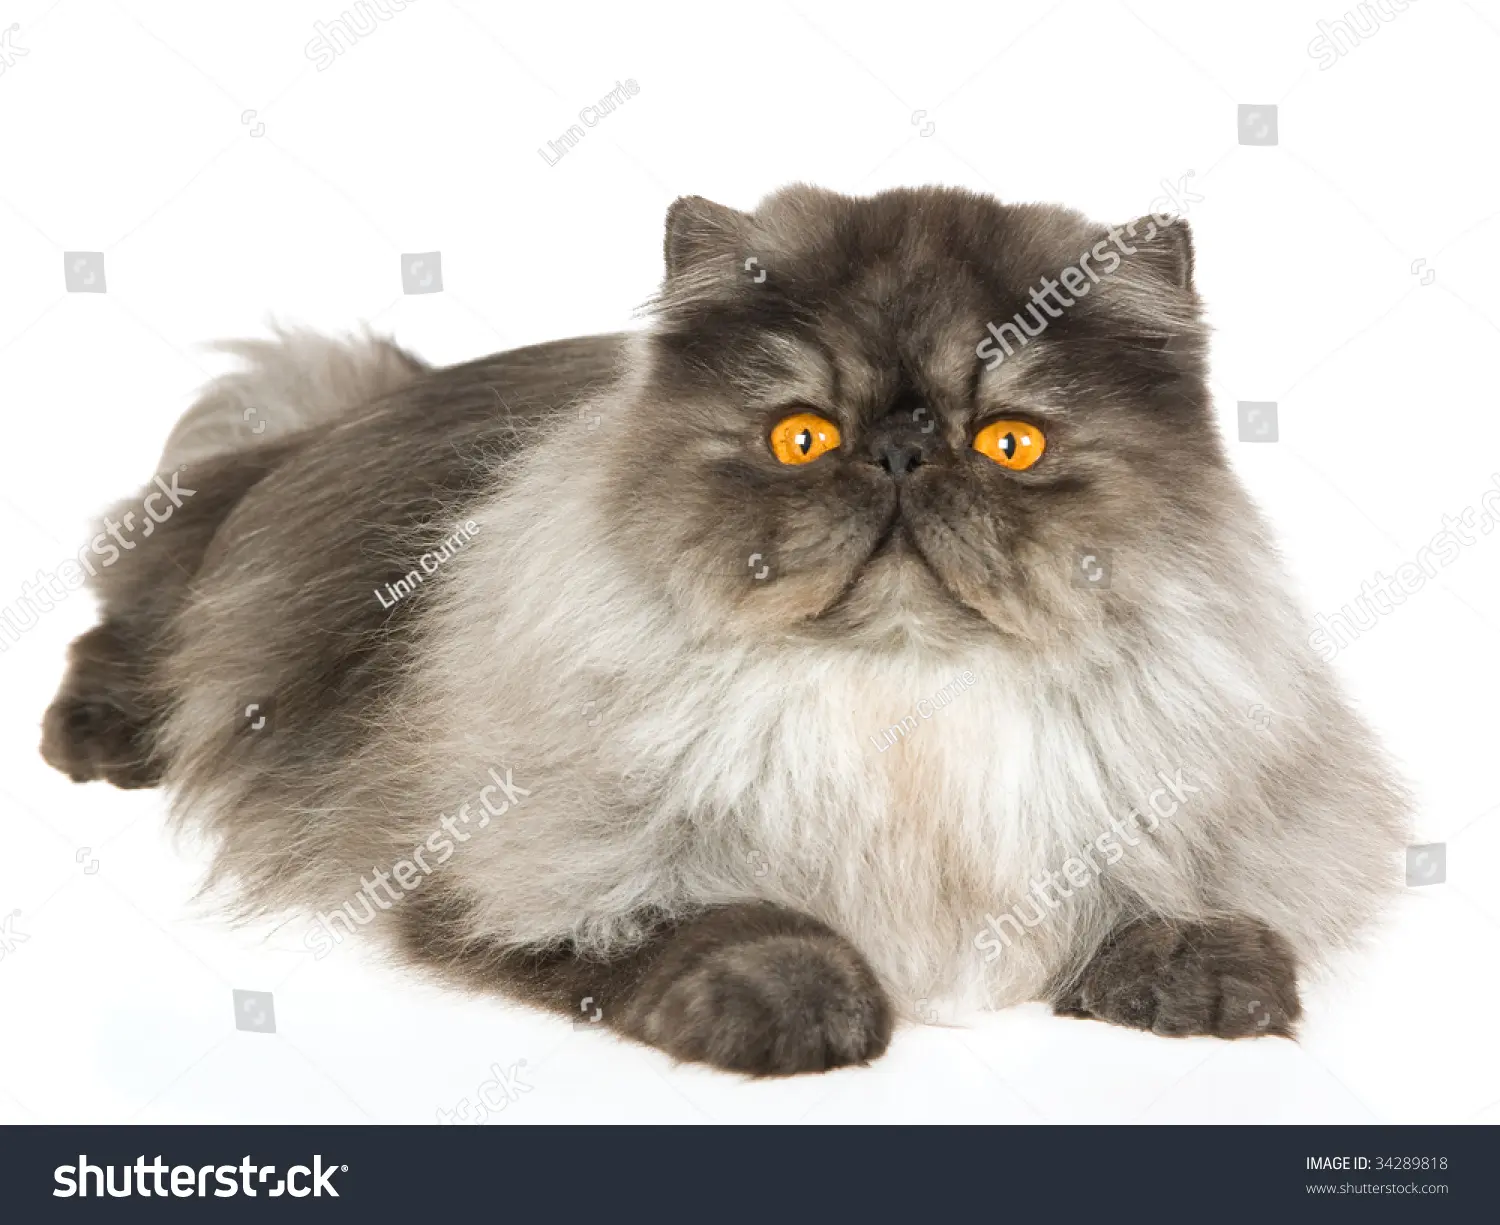 smoked persian cat - What is the rarest Persian color